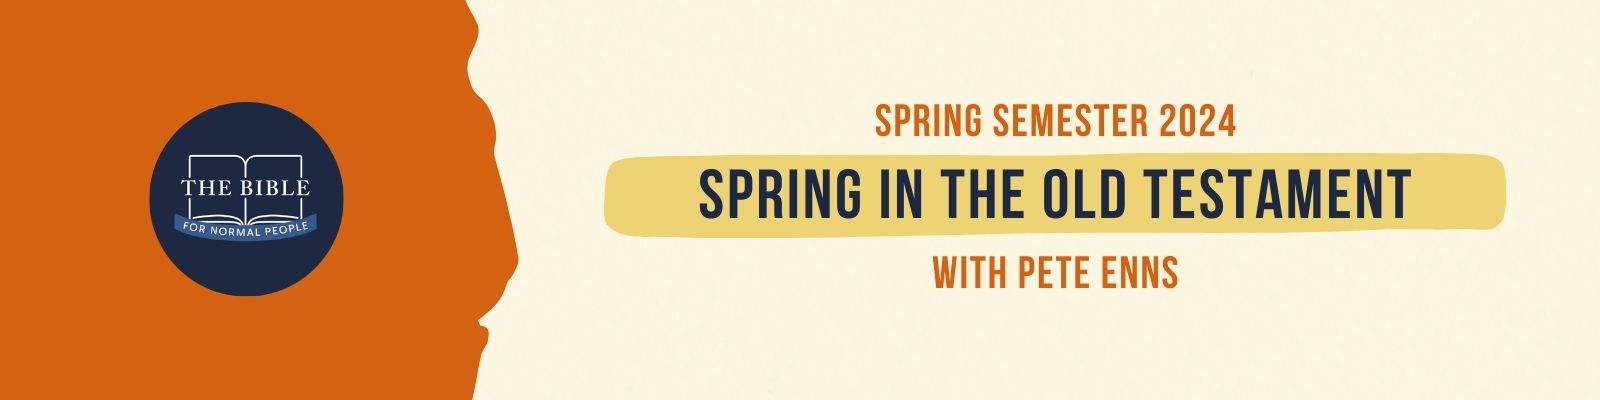 Spring Semester 2024 Spring in the Old Testament with Pete Enns